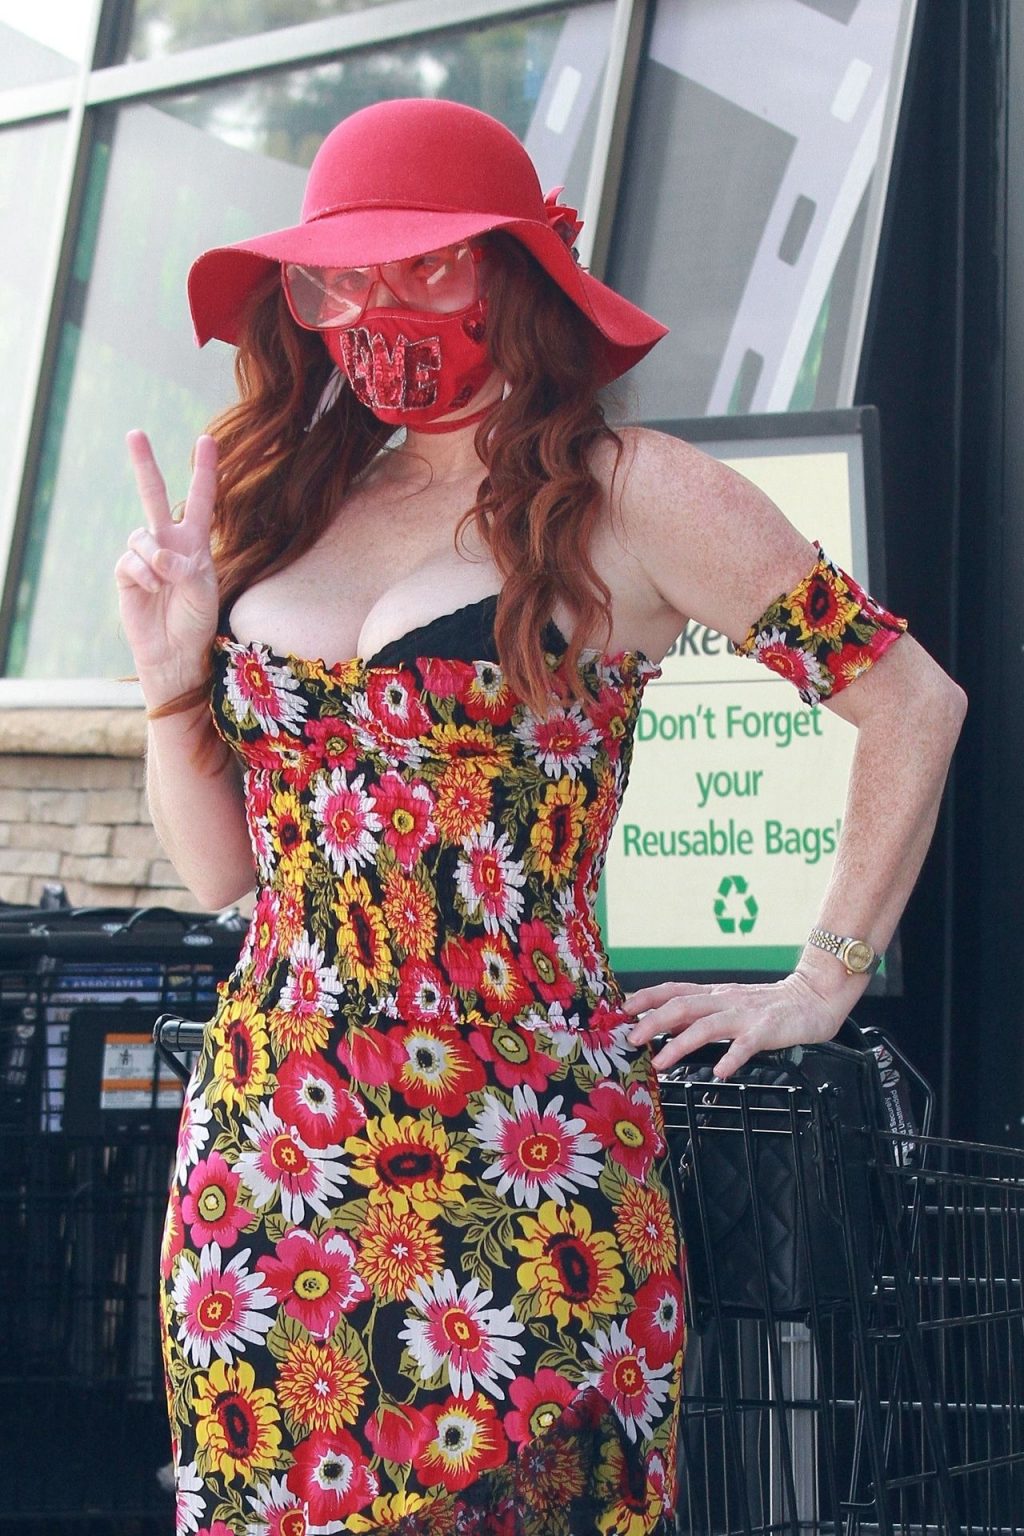 Phoebe Price Sanitizes Outside the Grocery Store (38 Photos)